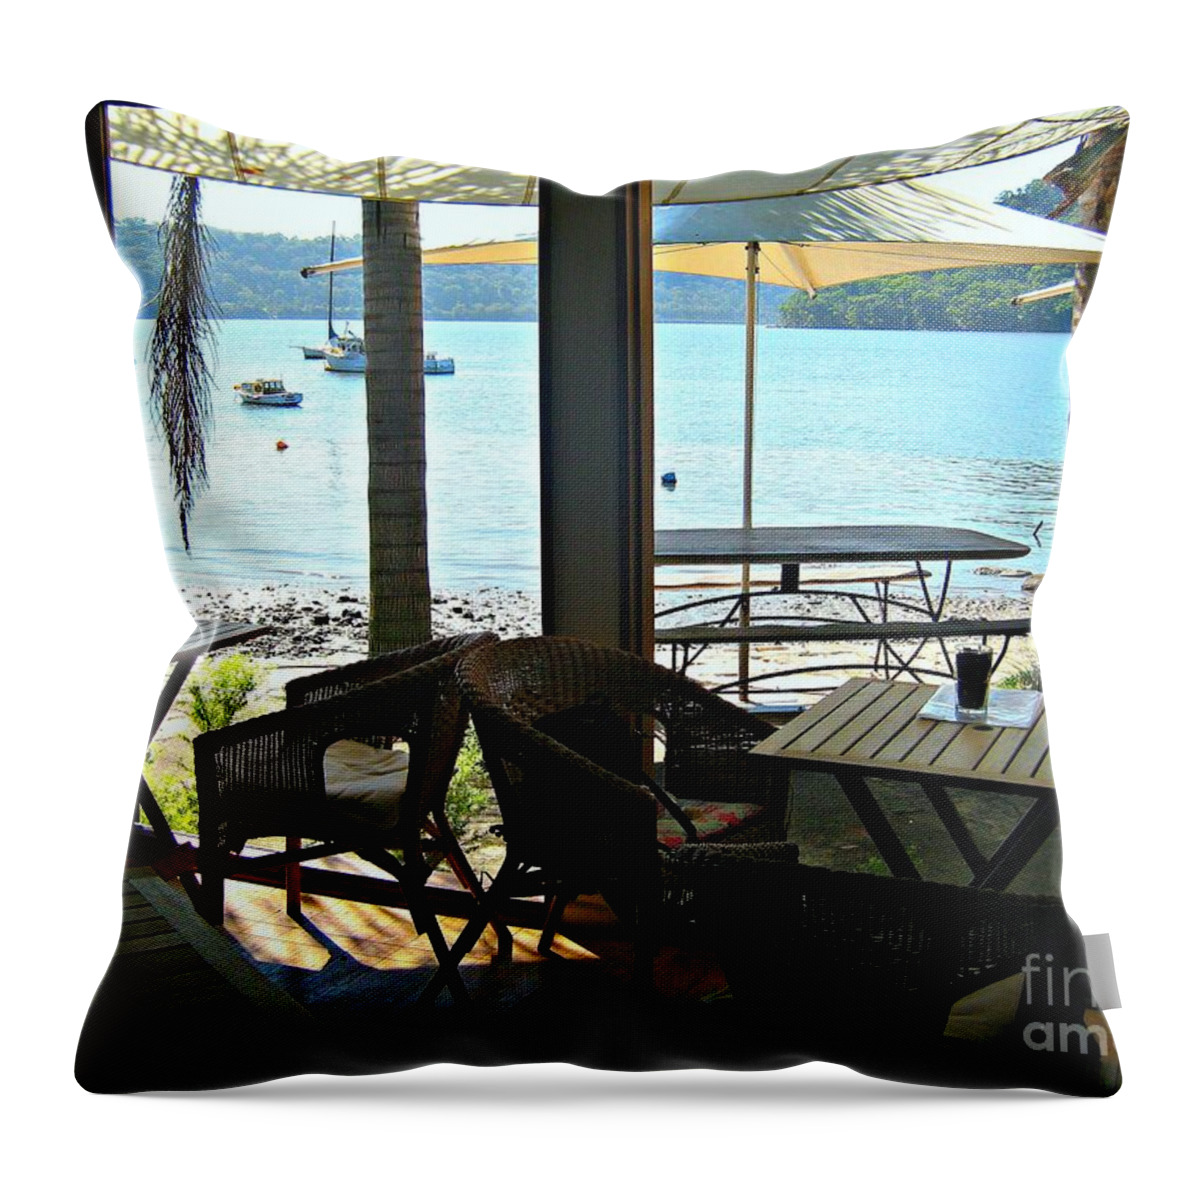 Water Throw Pillow featuring the photograph River View by Leanne Seymour